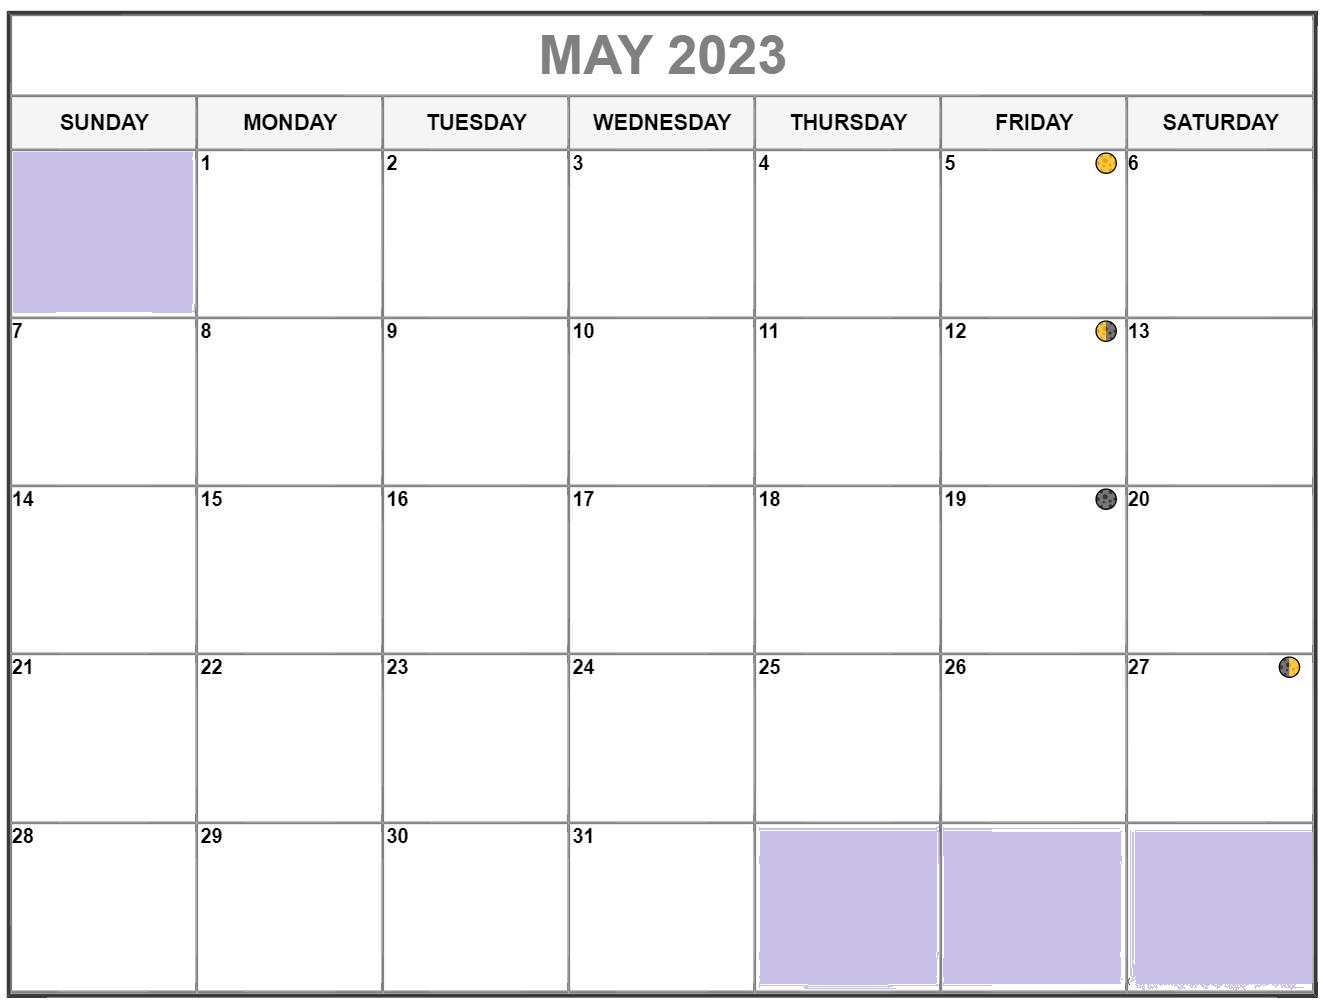 May 2023 lunar calendar with zodiac signs and moon phases